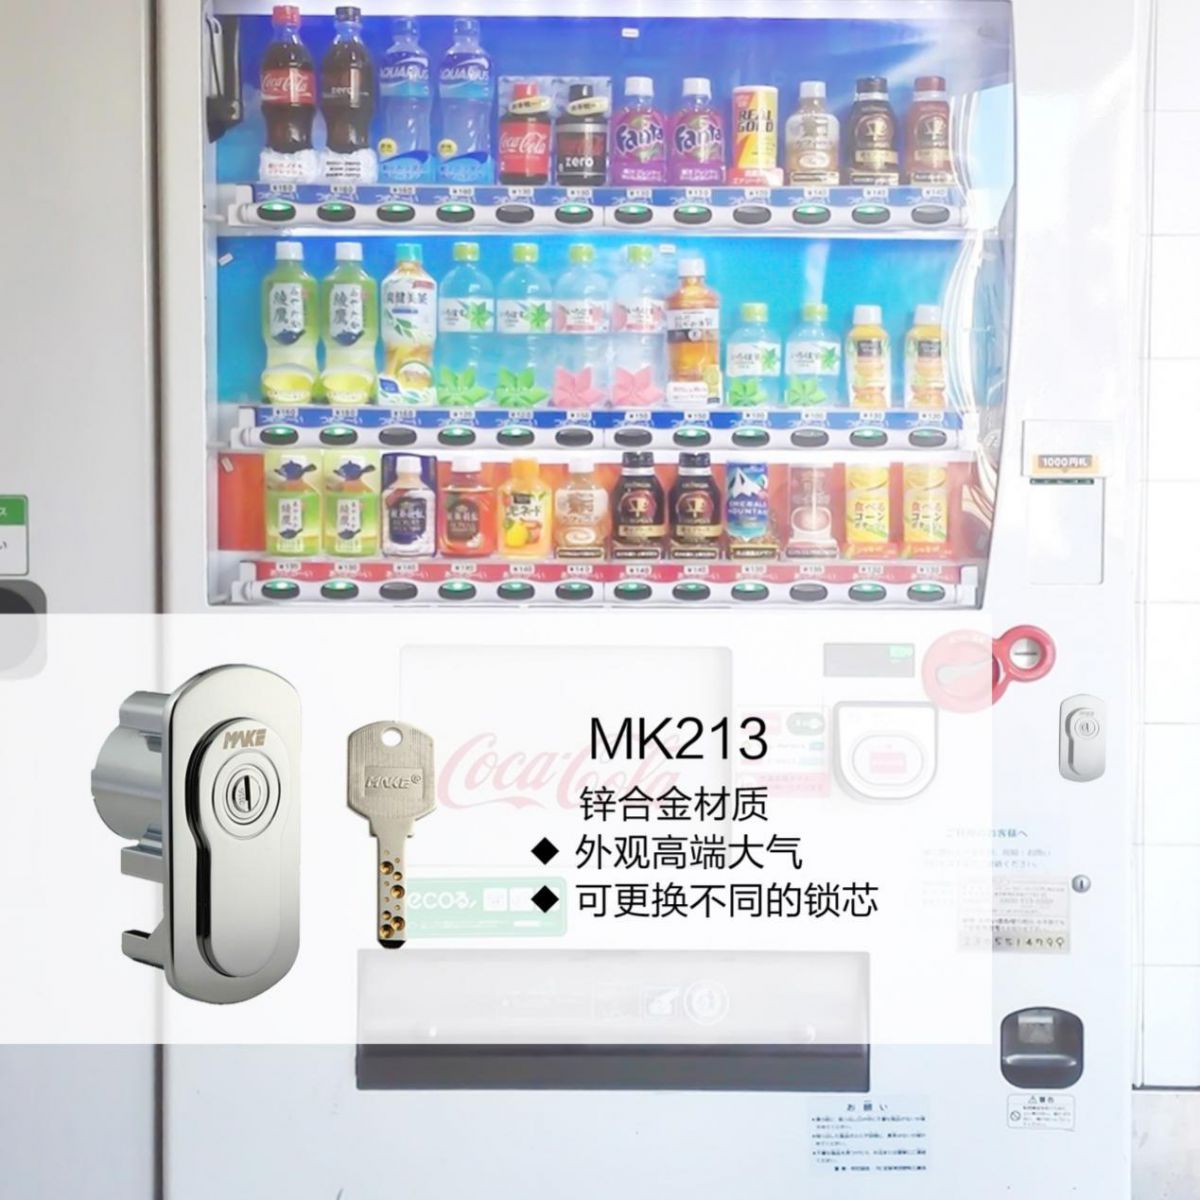 pick-the-most-reassuring-lock-for-your-vending-machine-mk213.jpg